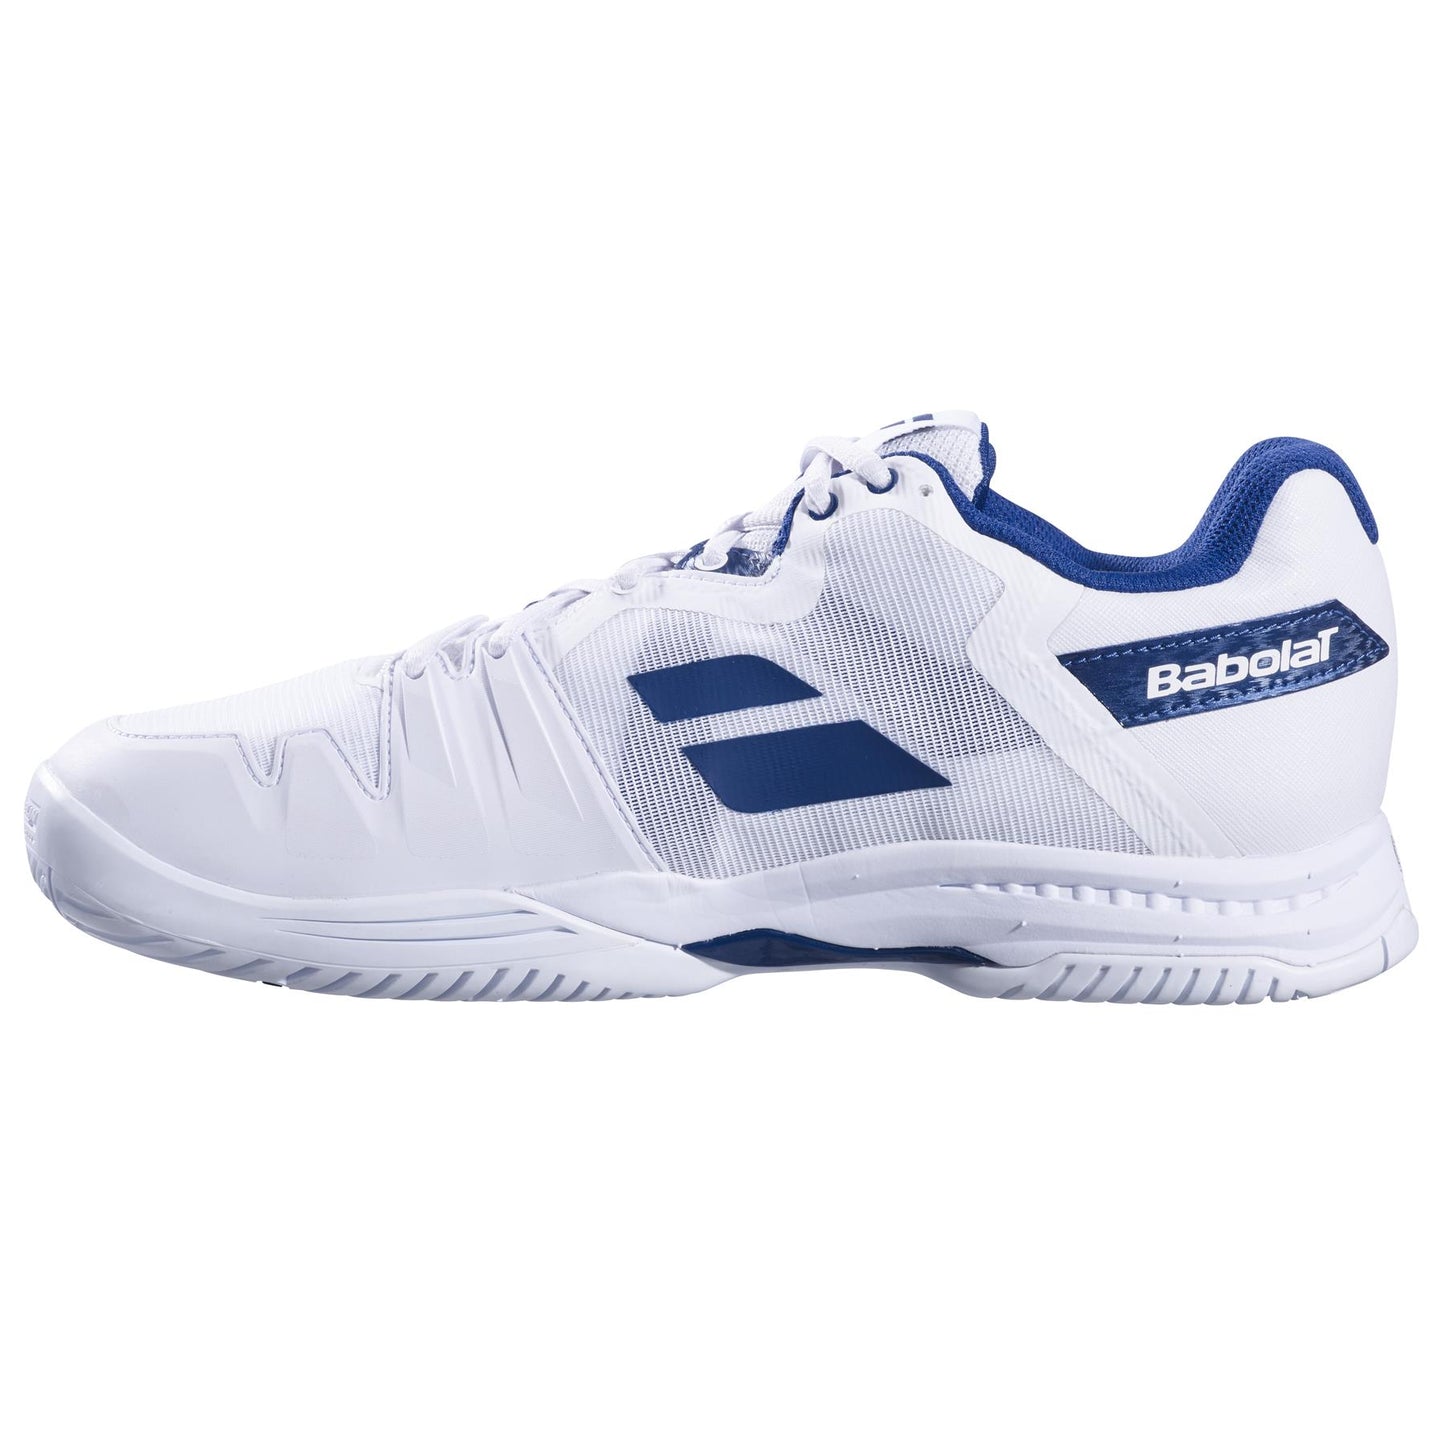 Babolat SFX3 All Court Mens Tennis Shoes - White / Navy - Left